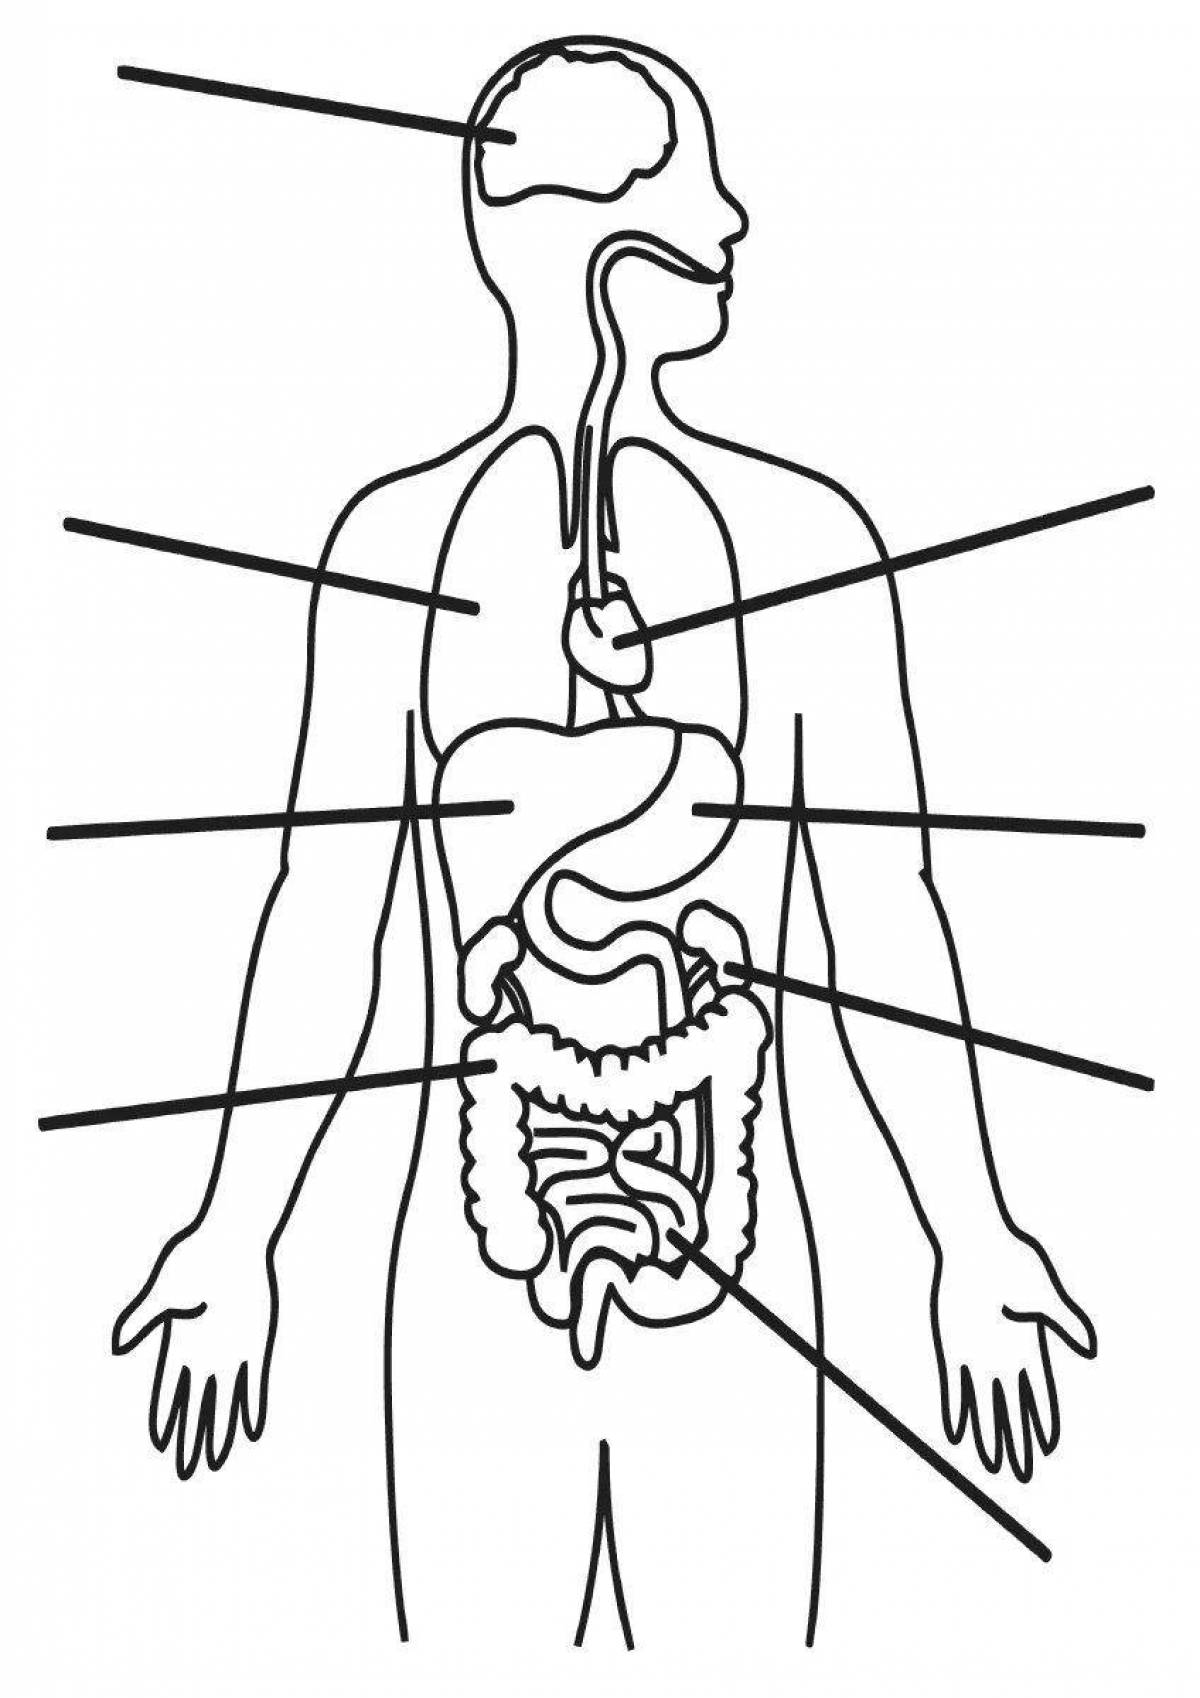 The internal structure of the human body 2 class #1